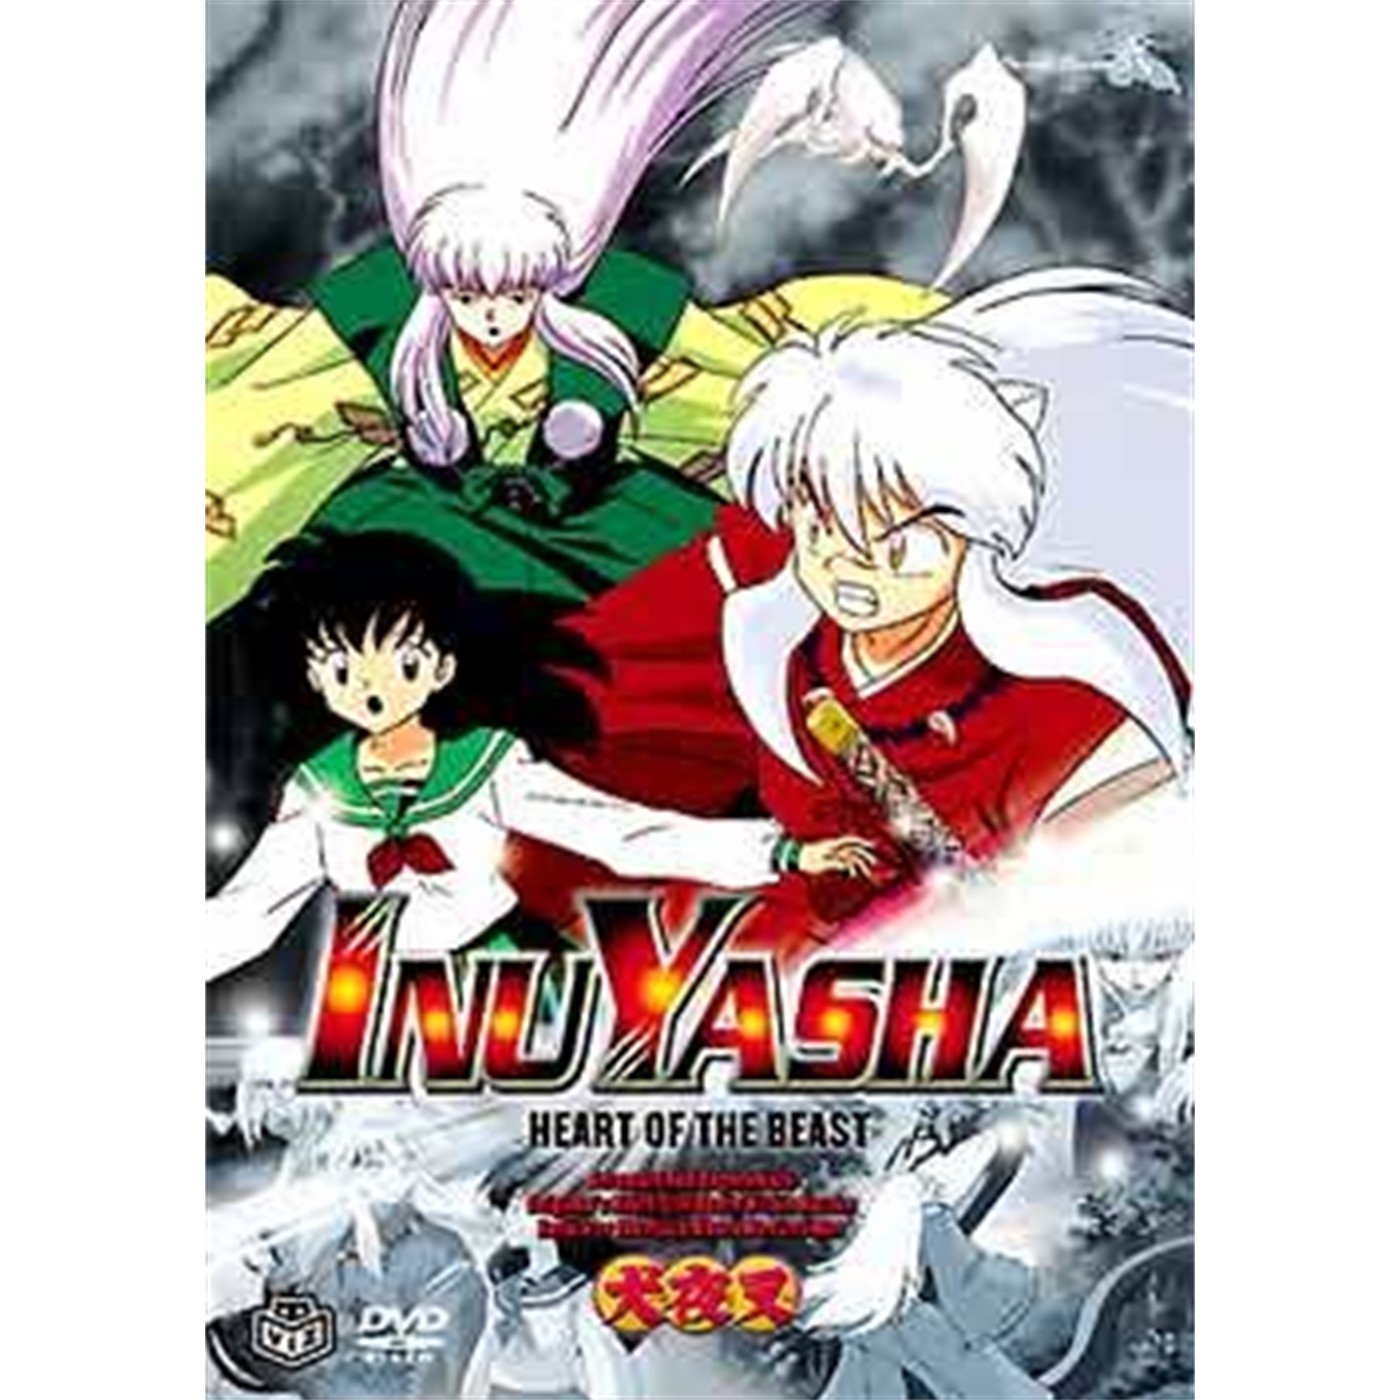 InuYasha, Vol. 16: Heart of the Beast (DVD)